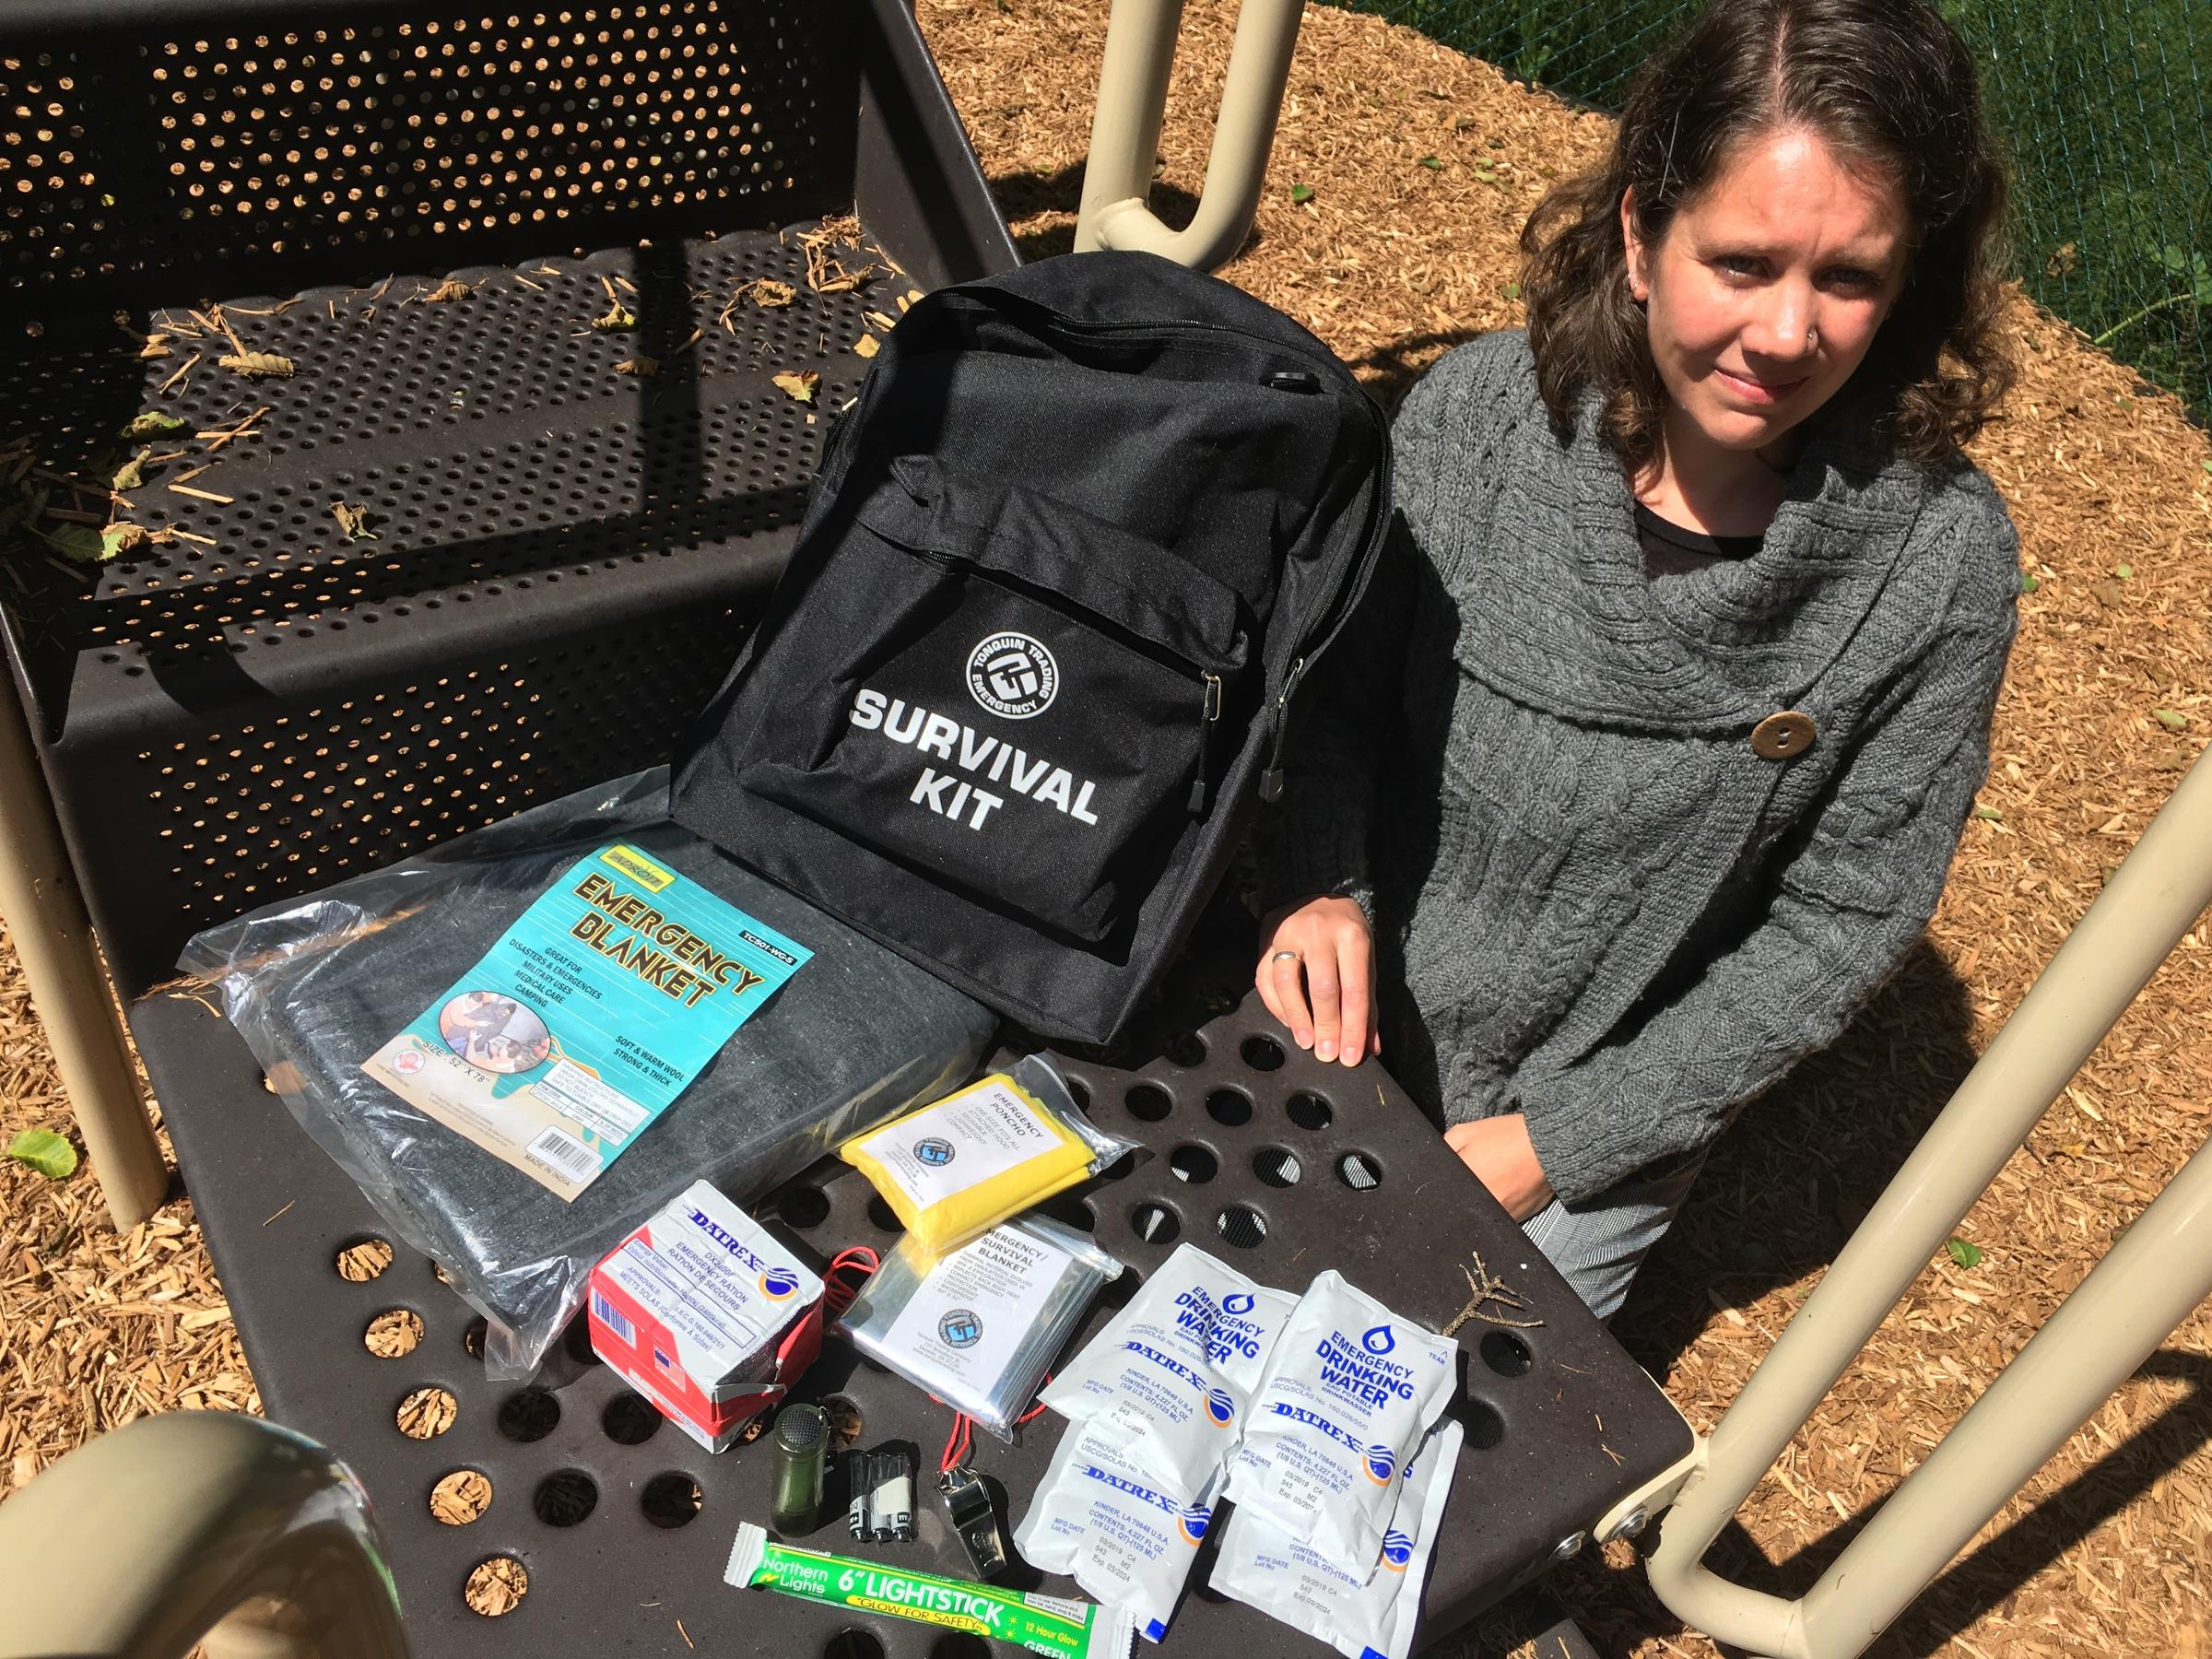 Cannon Beach Academy director Amy Fredrickson with one of the school's 55 survival kits. CREDIT: TOM BANSE / NW NEWS NETWORK